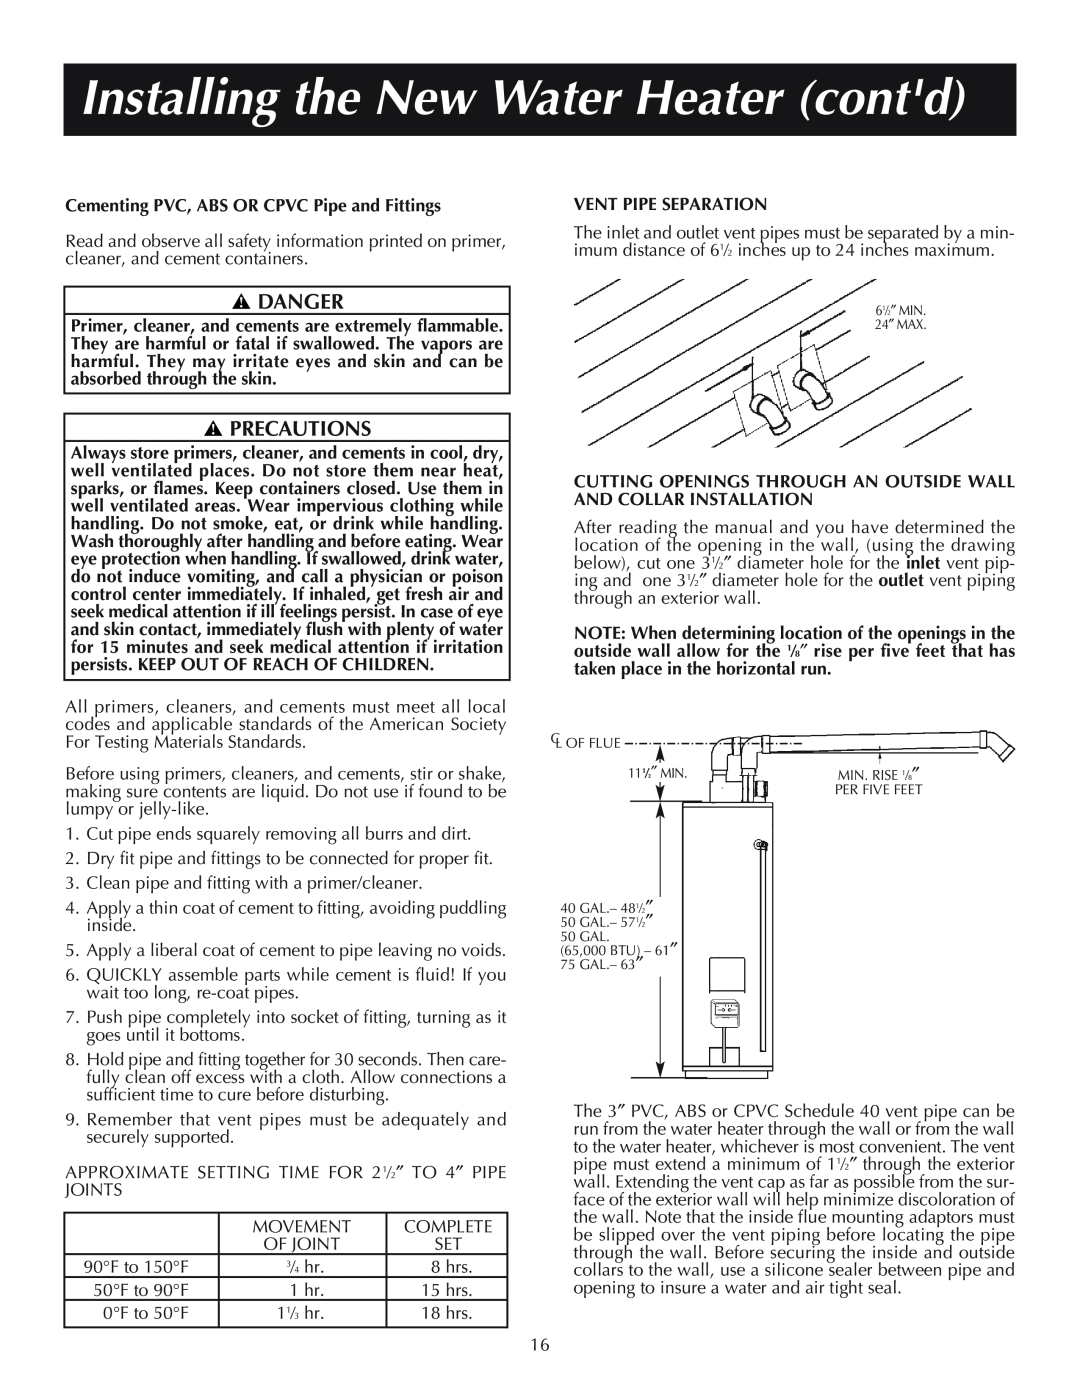 Reliance Water Heaters 11-03, 606, 184333-001 instruction manual Installing the New Water Heater contd, Danger, Precautions 